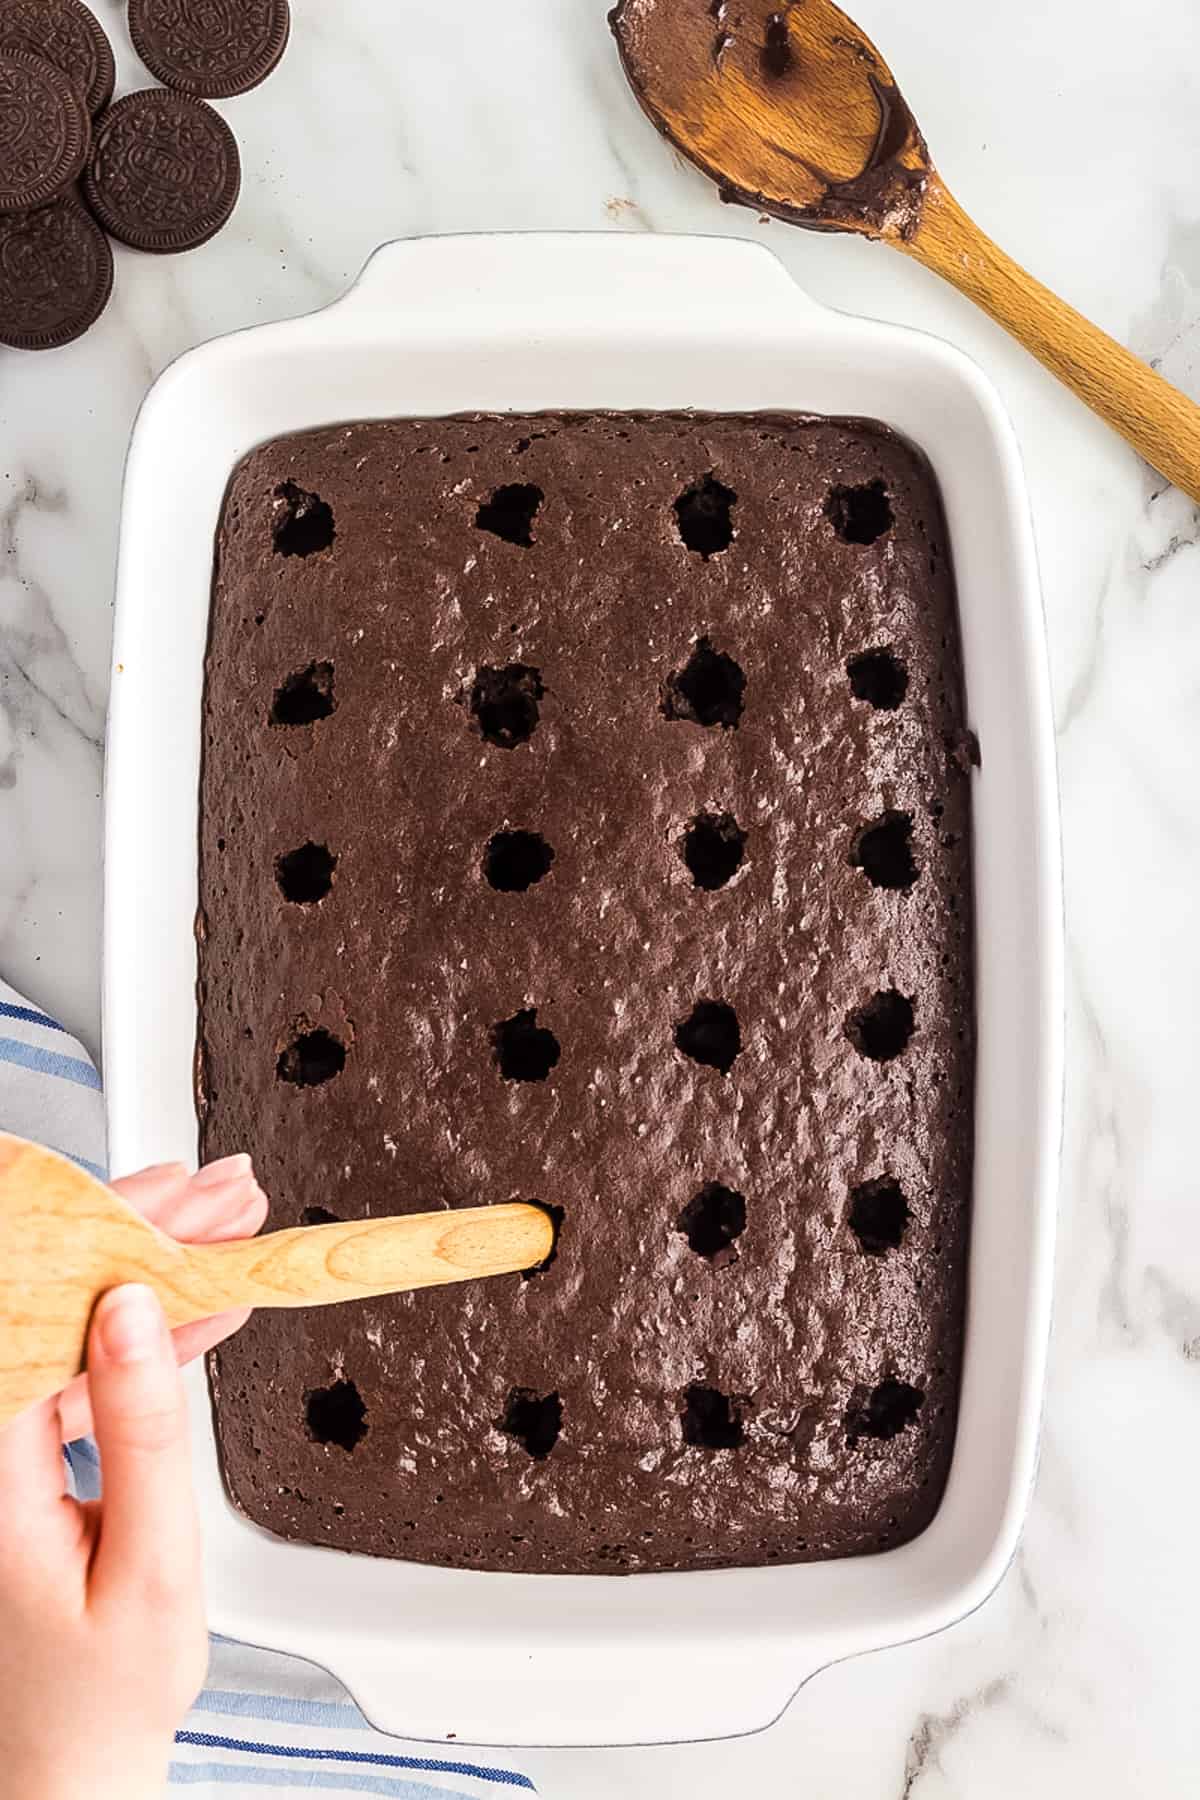 Poking holes in a chocolate cake